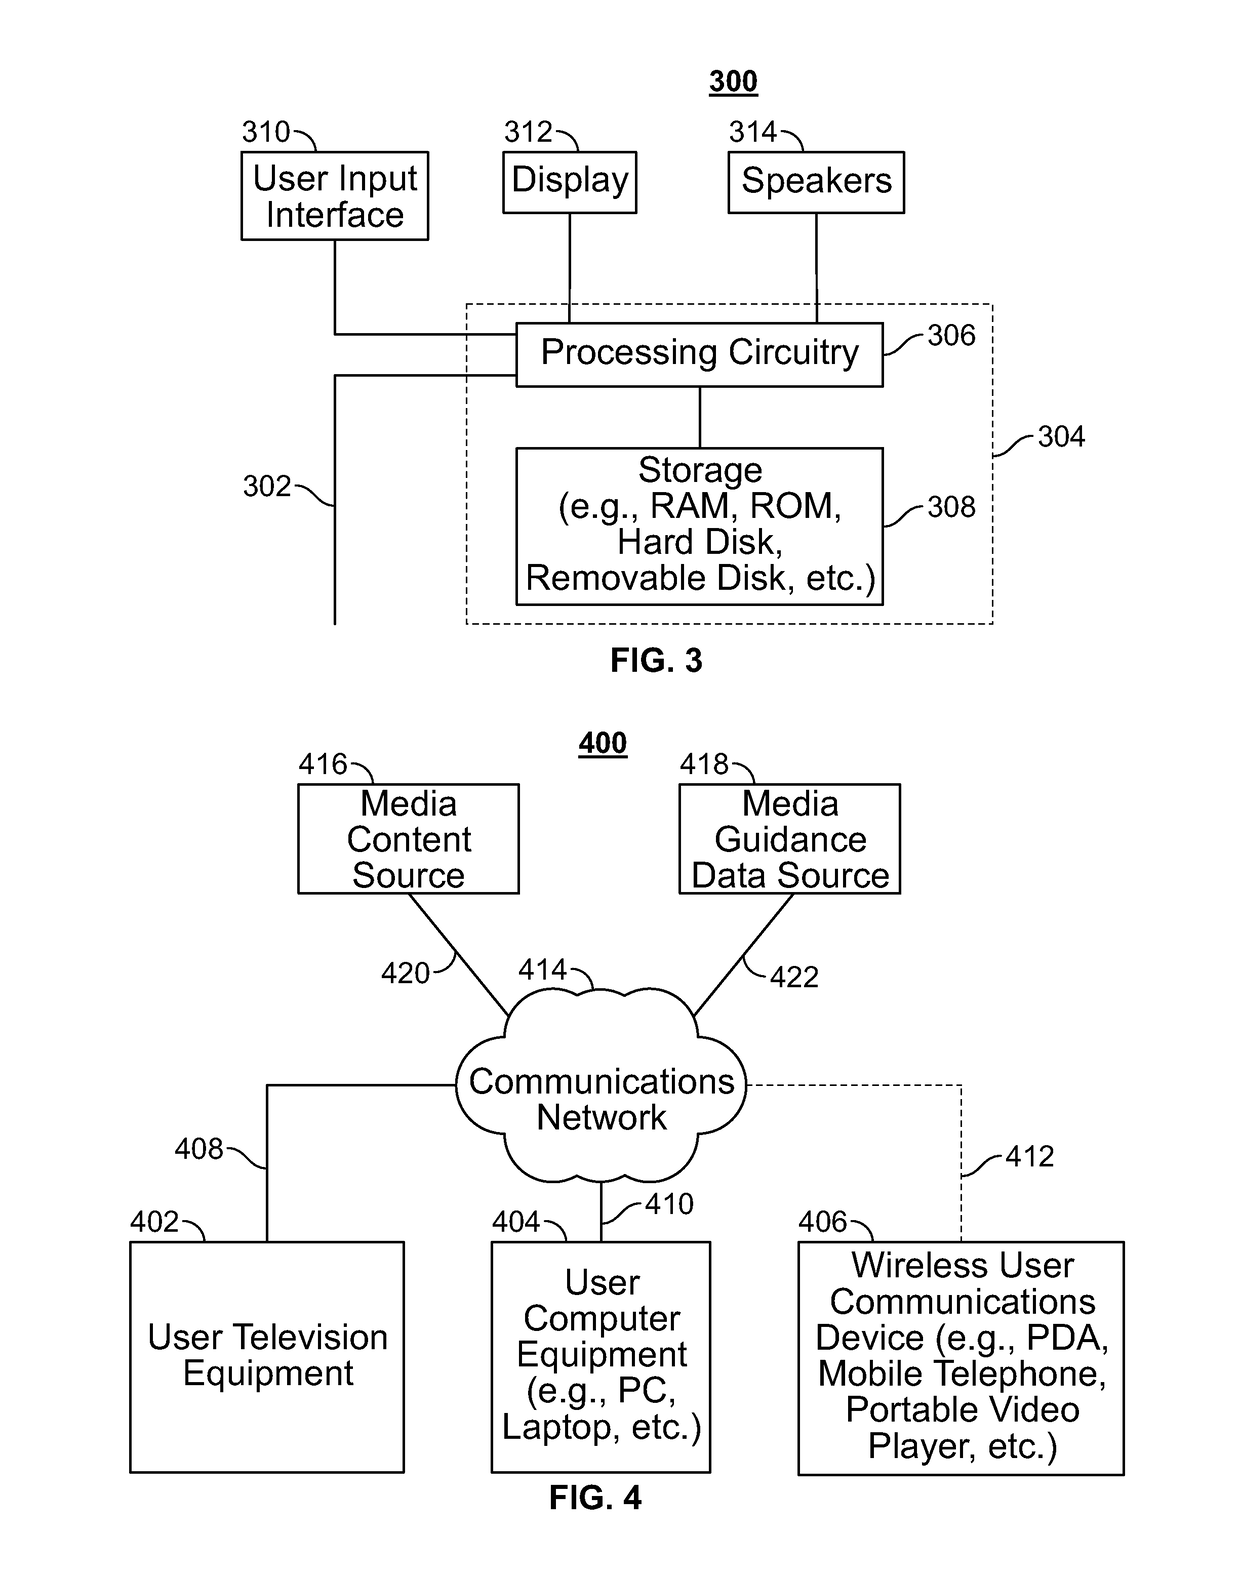 Systems and methods for updating a knowledge graph through user input